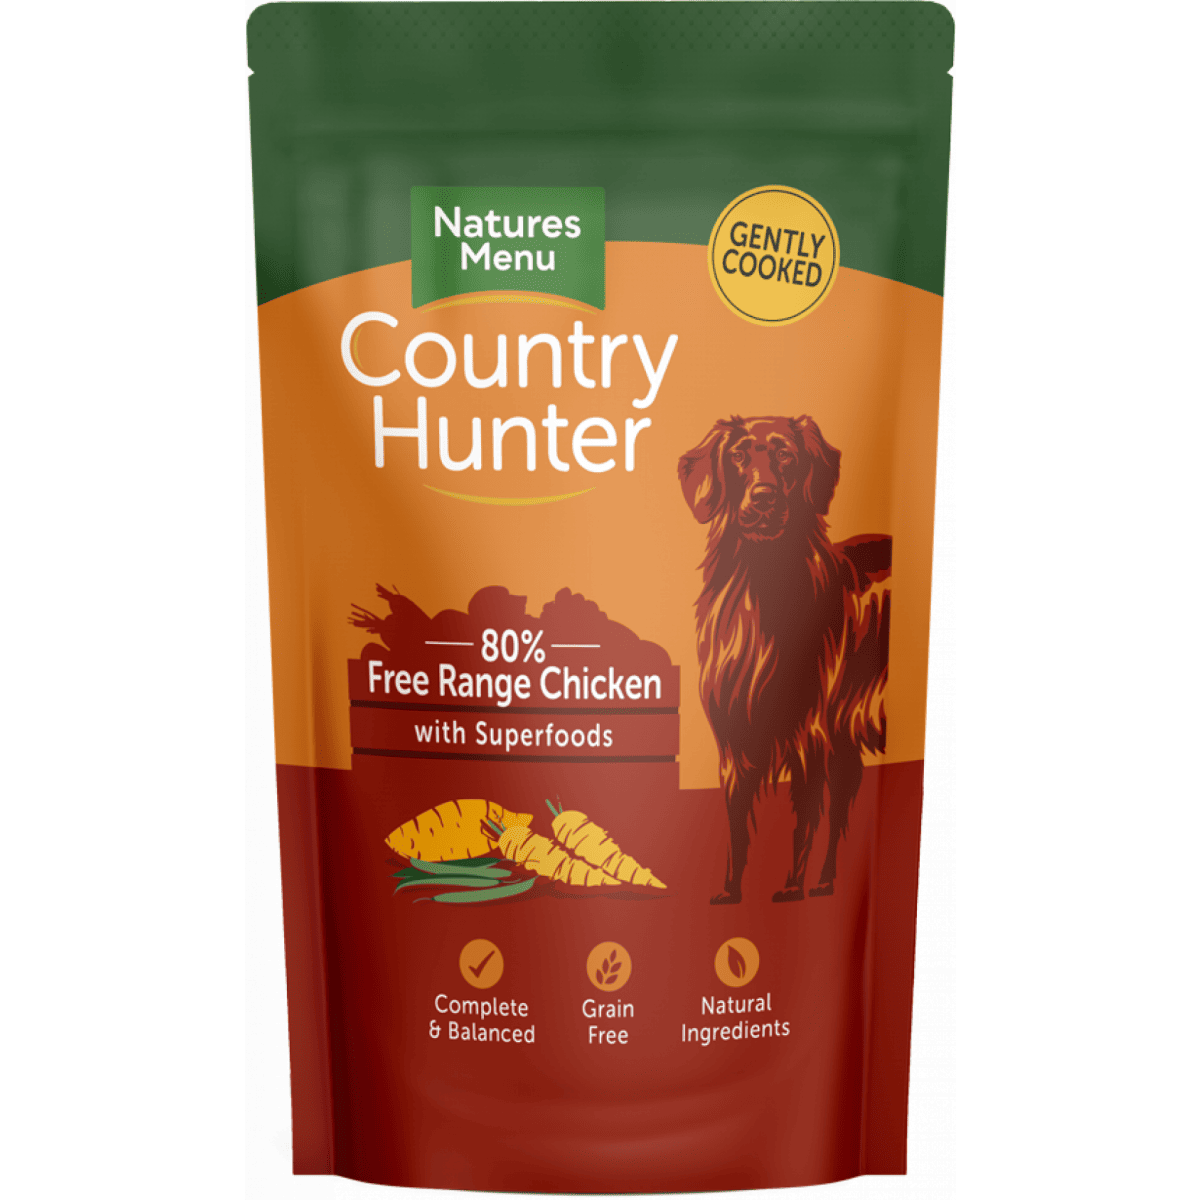 Country Hunter Free Range Chicken 6 x 150g – Pawfect Supplies Ltd Product Image